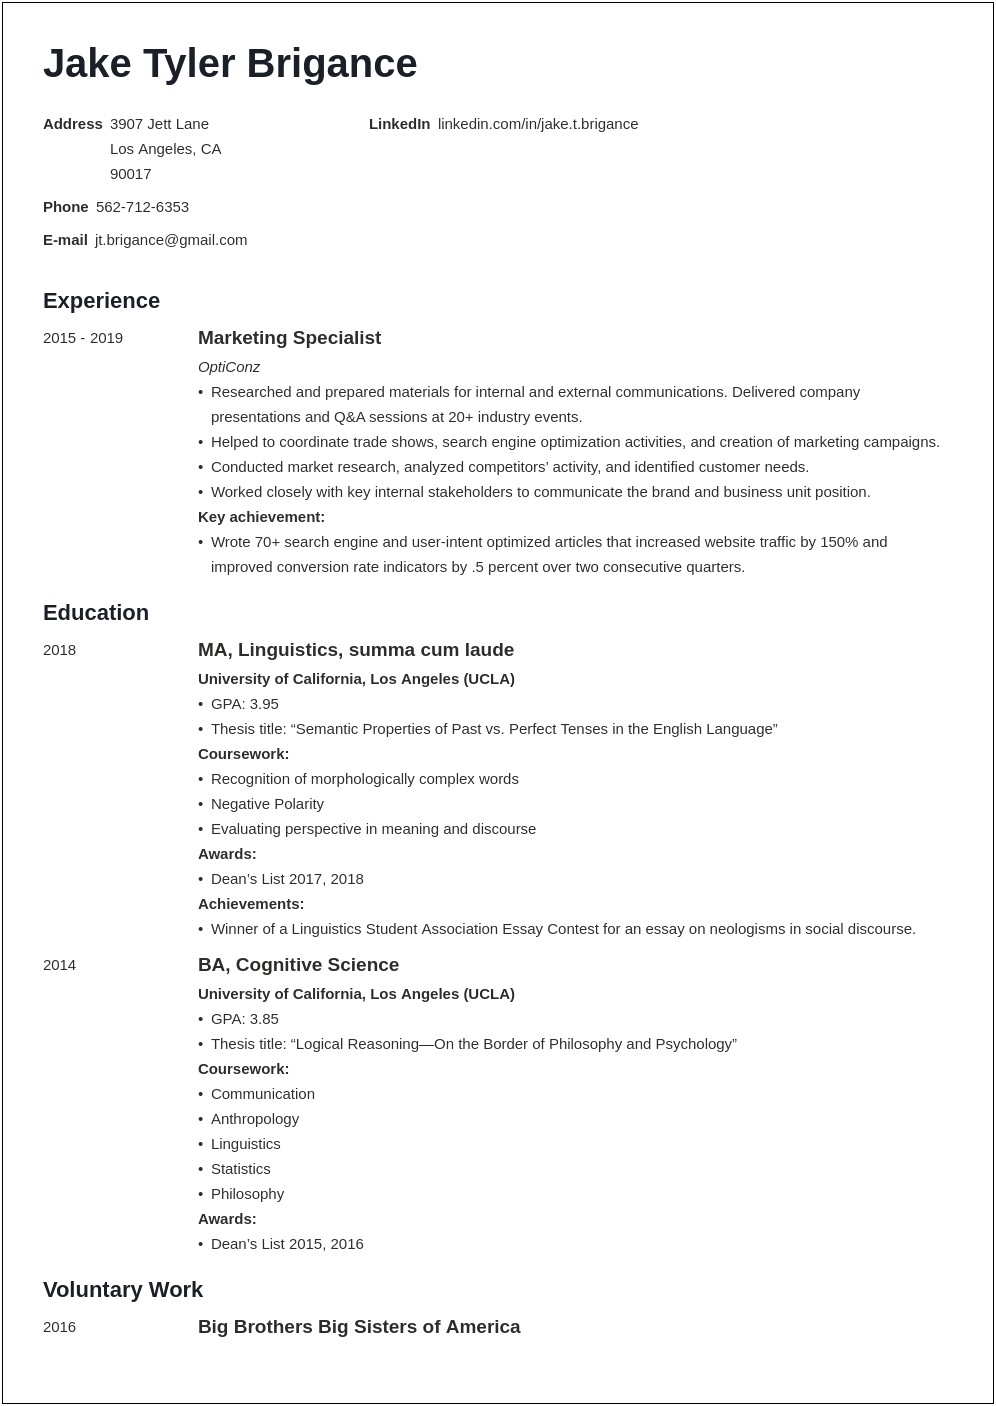 Good Fonts For Resumes Legal Resumes